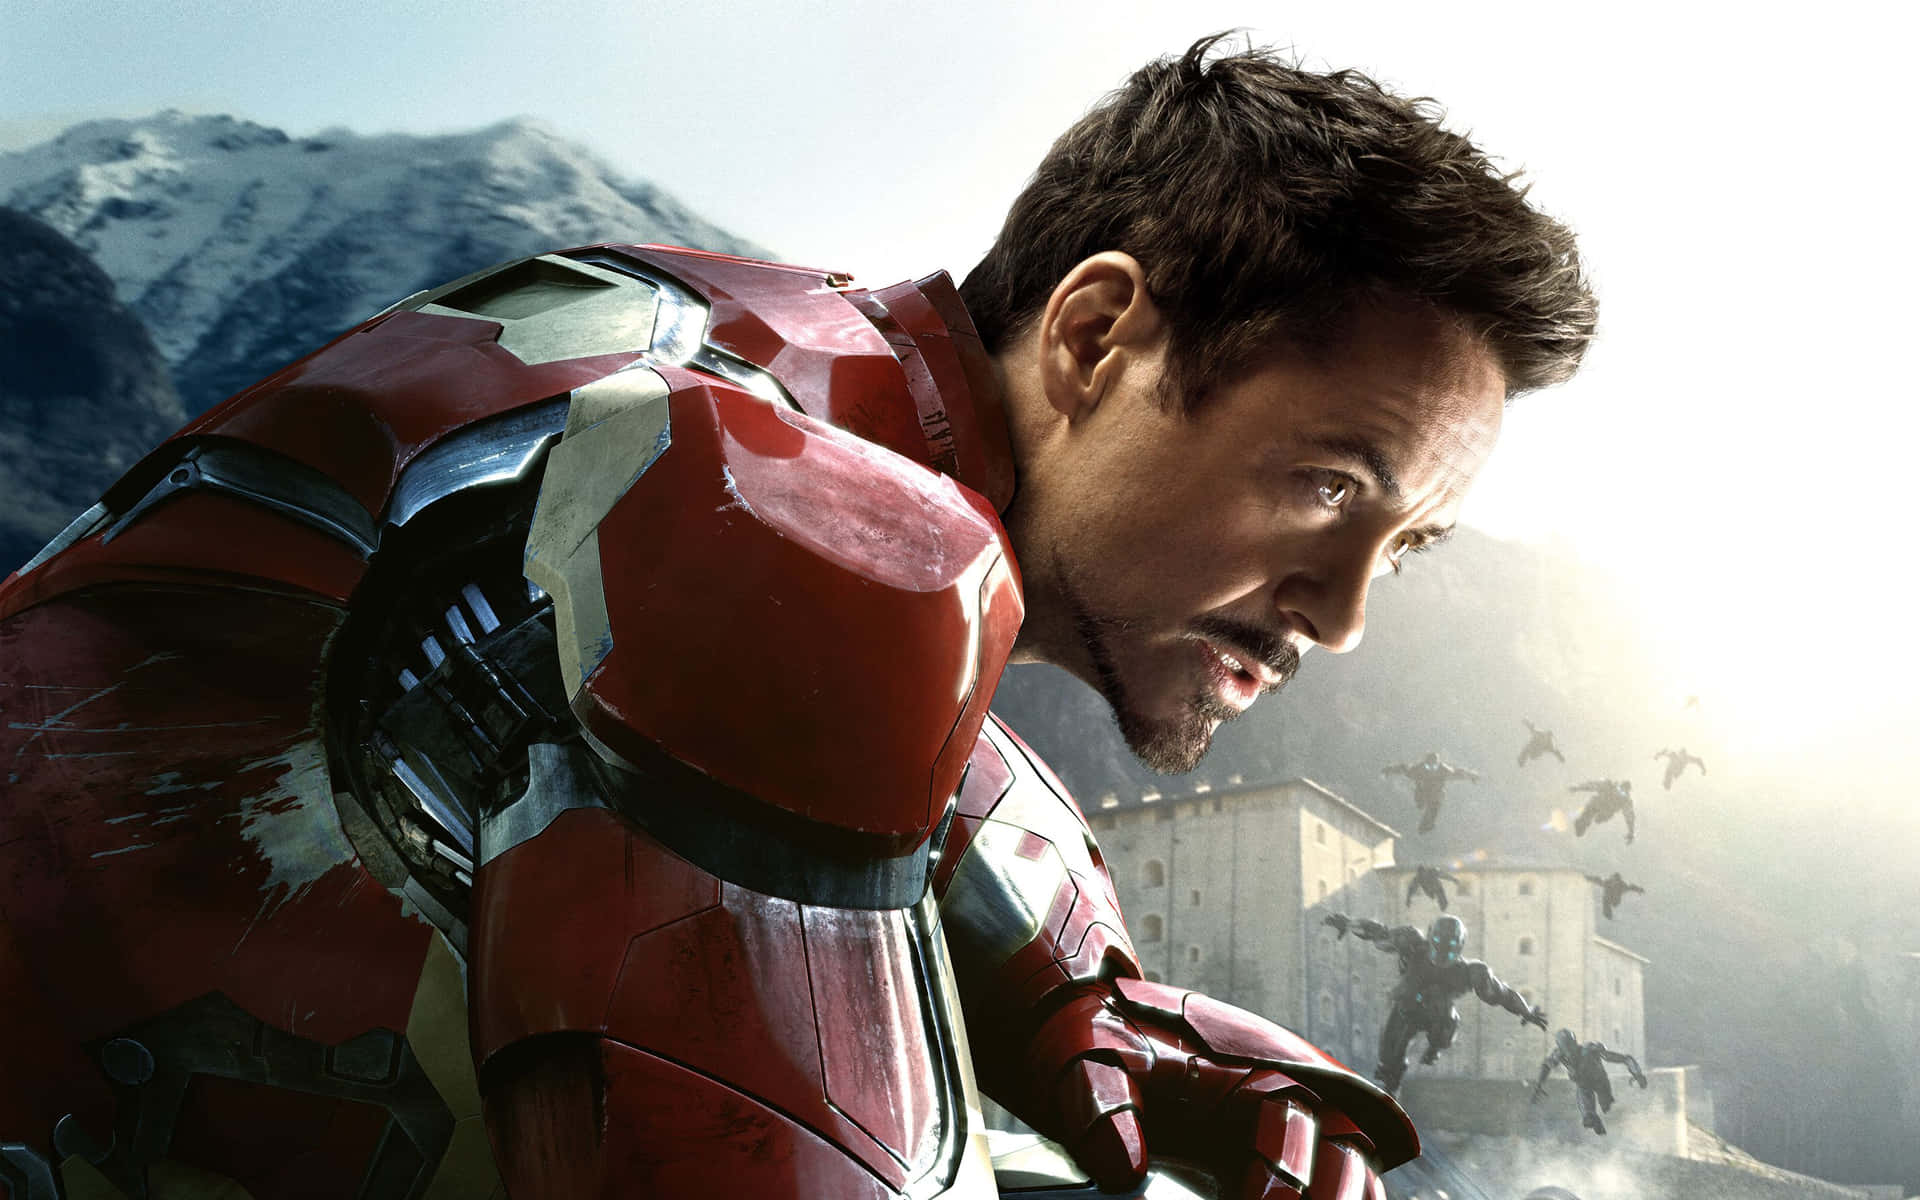 Iron Man in Action Wallpaper